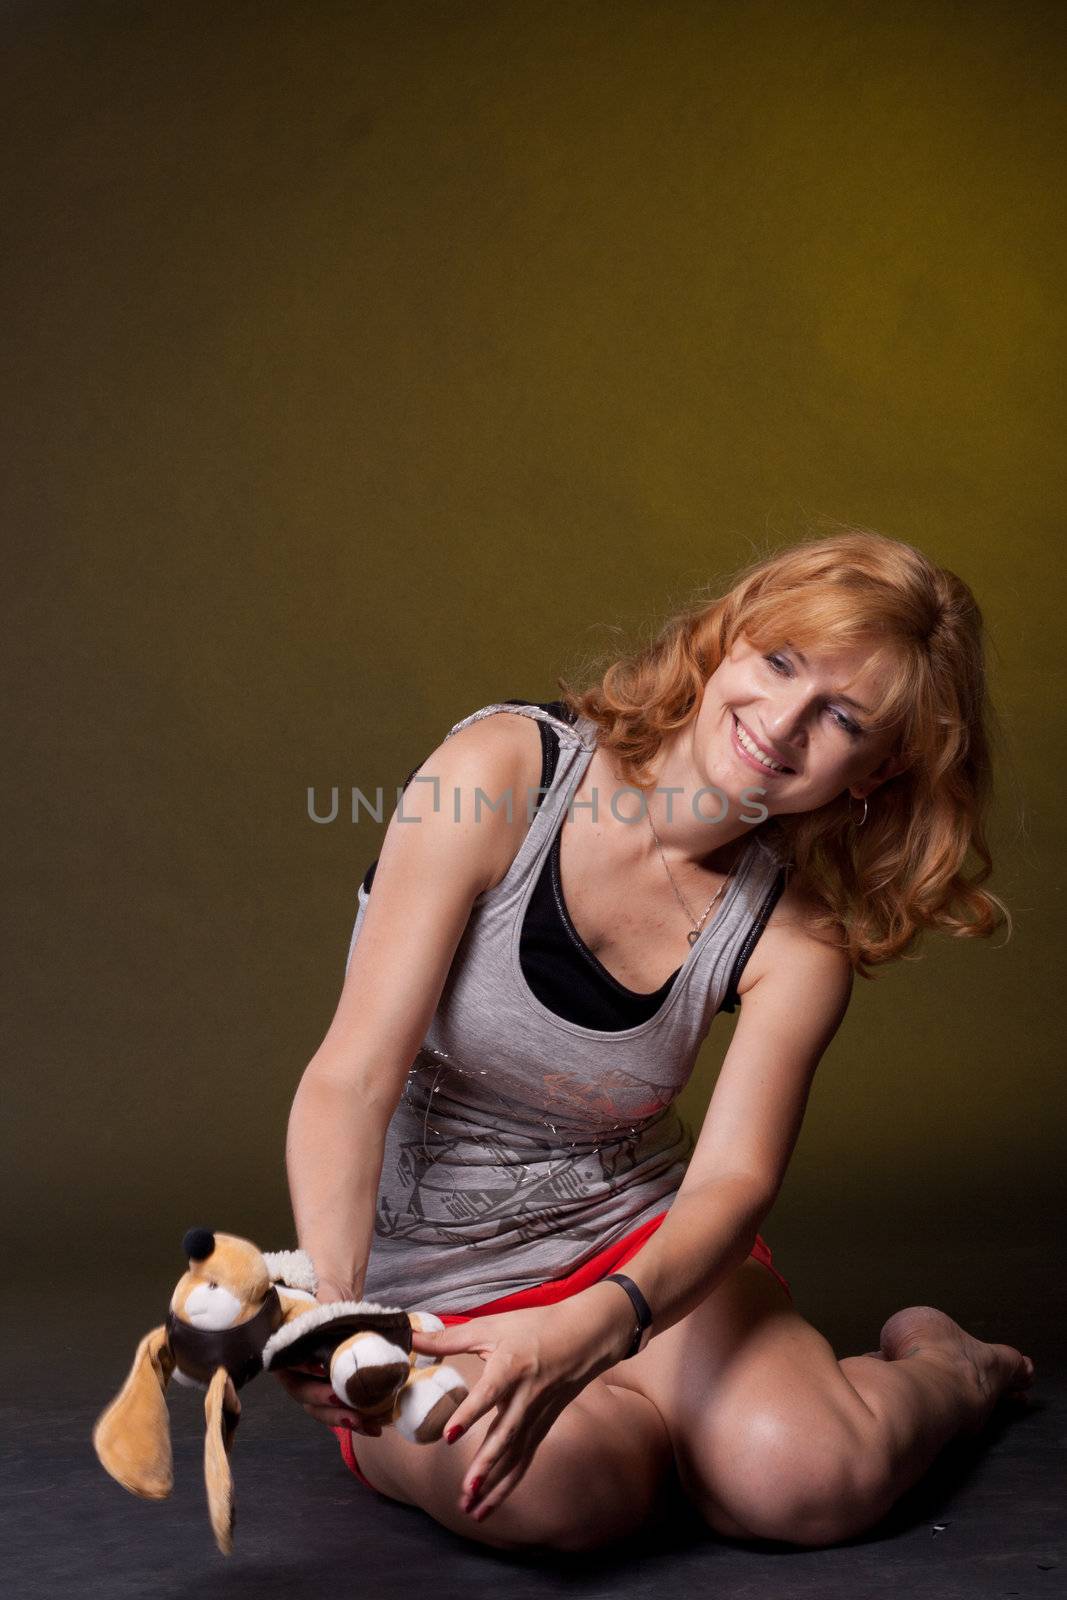 Red-haired girl with toys. Studio photography